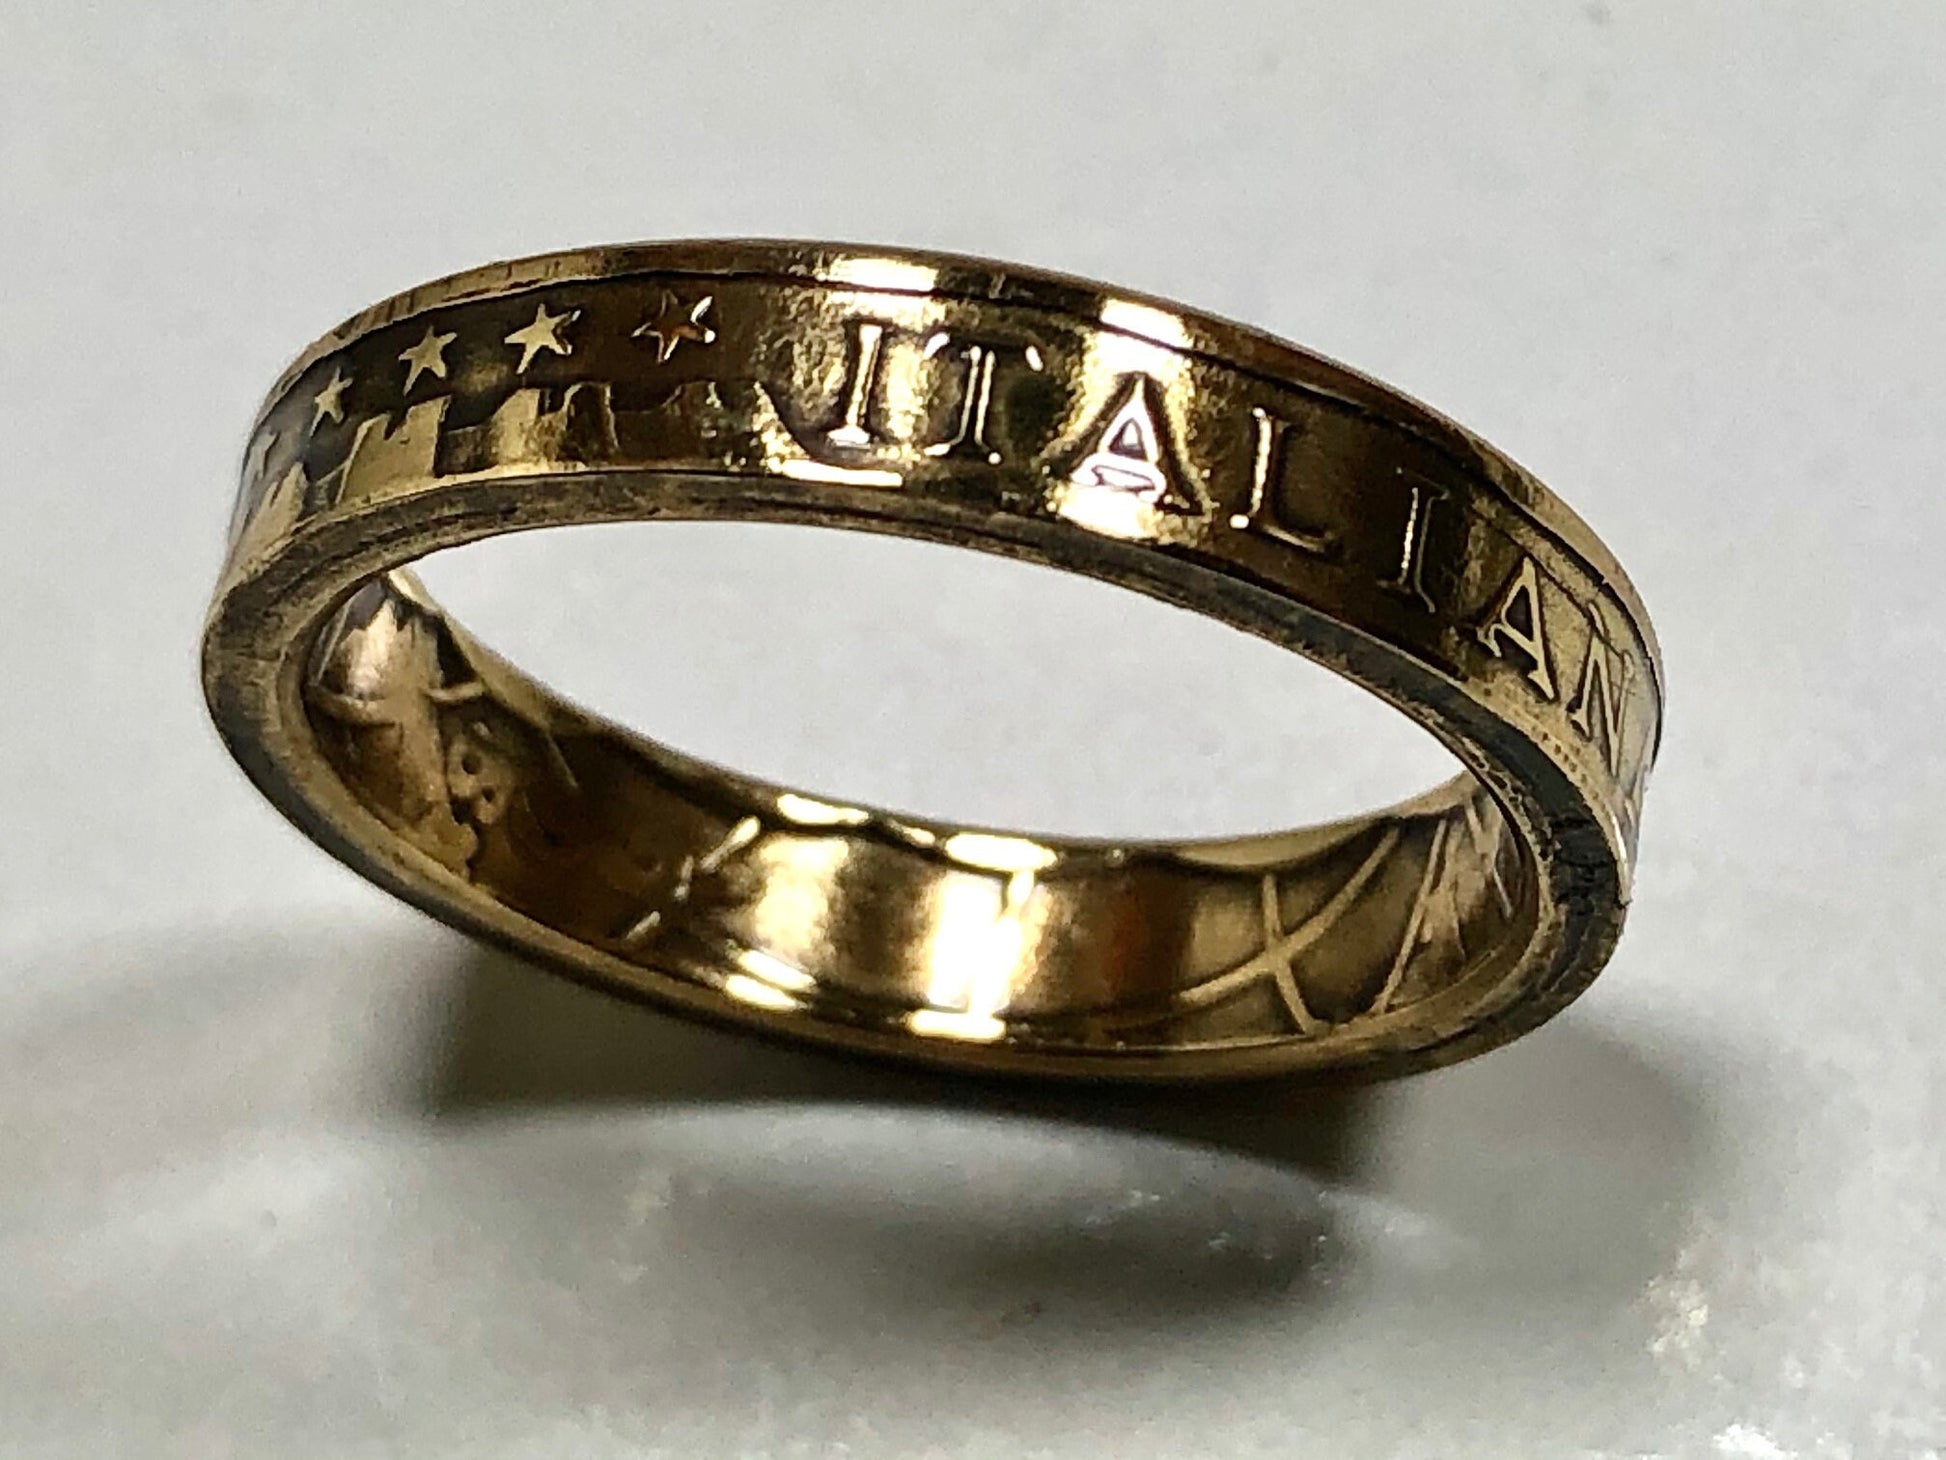 Italy Coin Ring Italian Vintage 1000 Lire Ring Handmade Personal Custom Ring Gift For Friend Coin Ring Gift For Him Her World Coin Collector